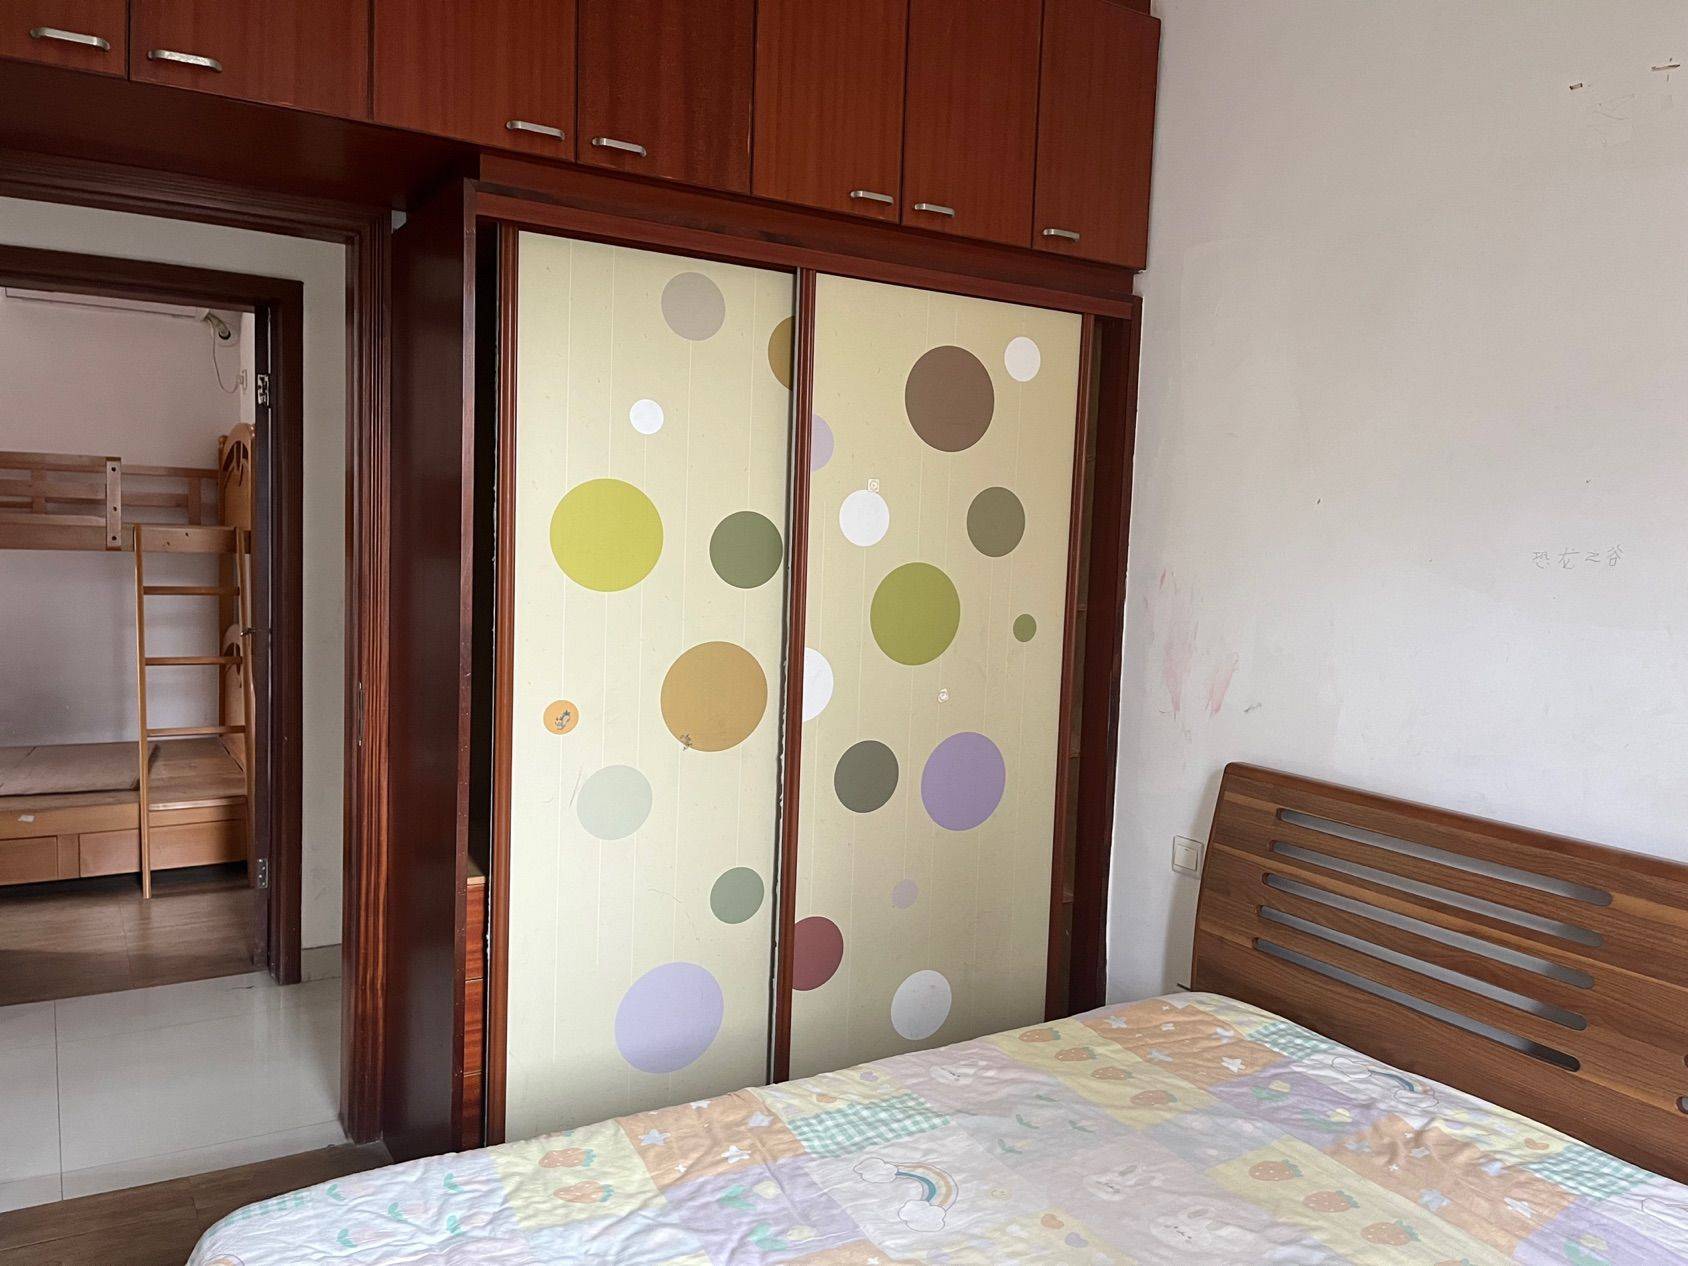 Dongguan-Dalingshan-70RMB/Night,Cozy Home,Clean&Comfy,No Gender Limit,Hustle & Bustle,“Friends”,Chilled,LGBTQ Friendly